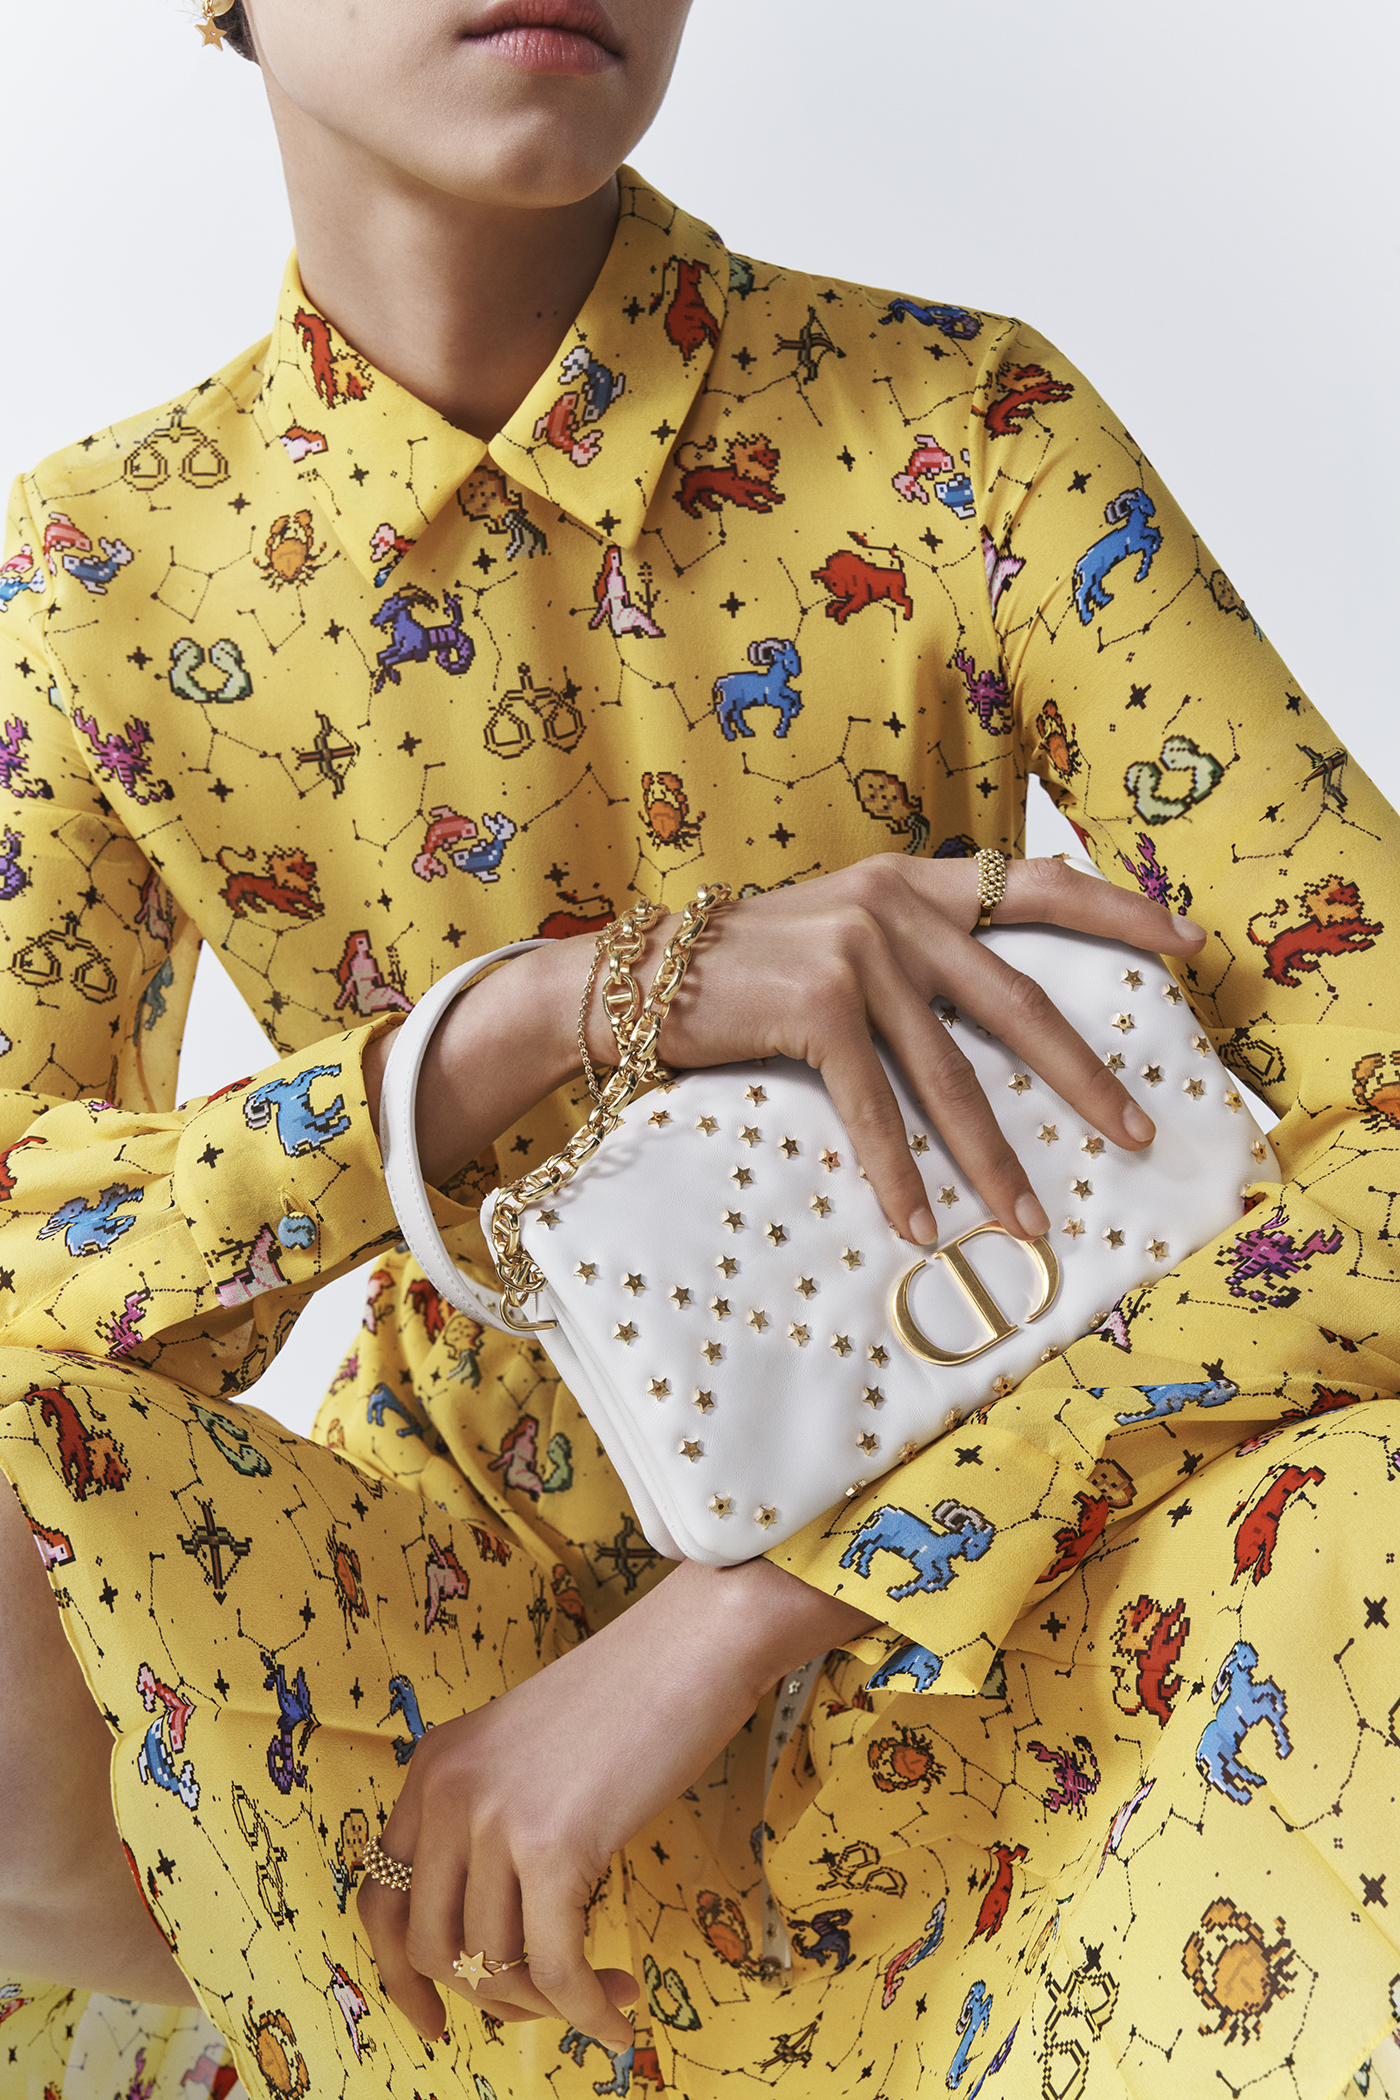 Dior Launches Lucky Dior Capsule